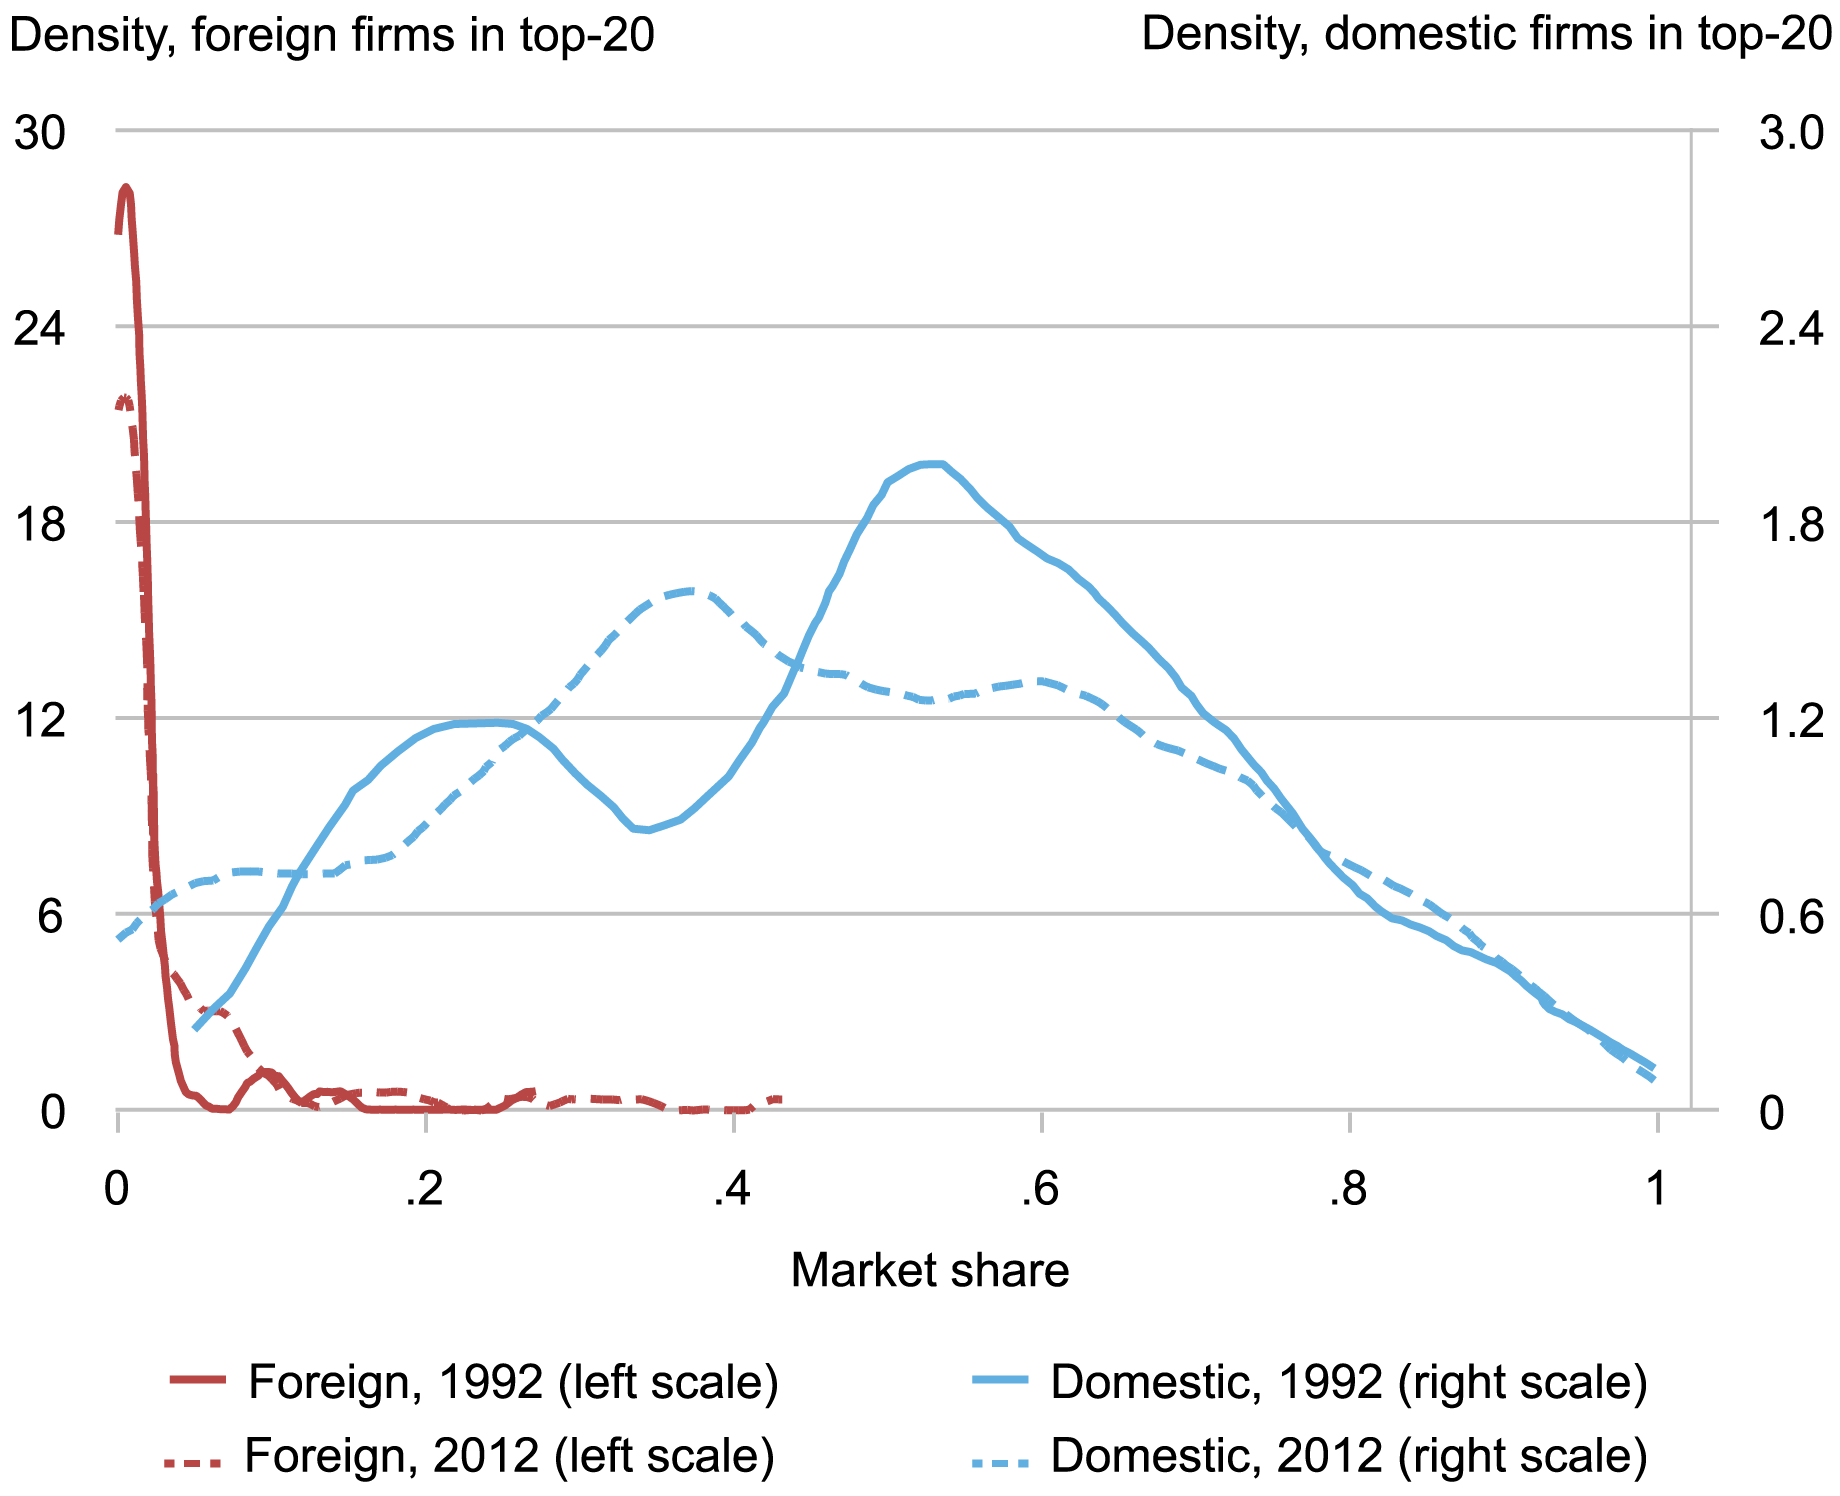 Alt=”line chart tracking market share density of top-20 foreign firms (left Y-axis/red) and top-20 domestic firms (right Y-axis/blue), with solid (1992) and dashed (2012) lines for each showing a loss of market share for U.S. firms and a gain for foreign firms”